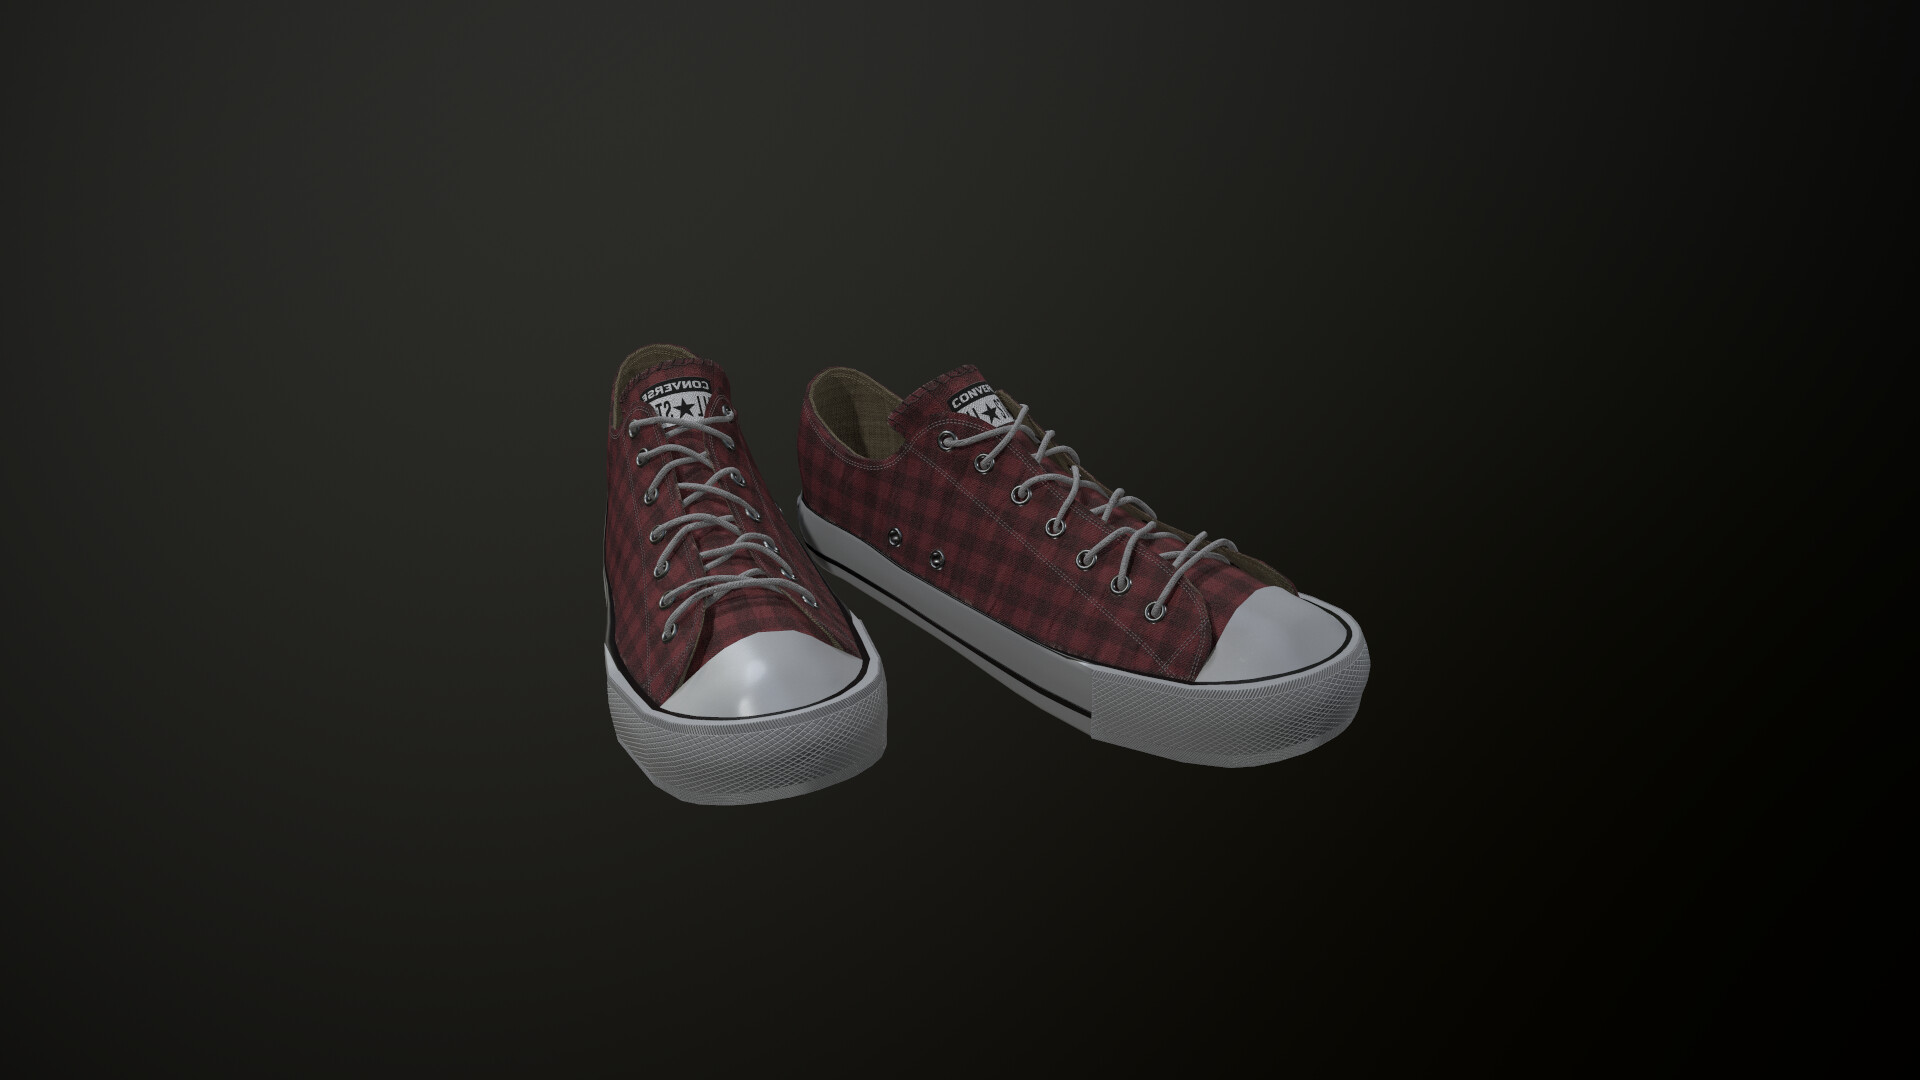 Andrea Bruno - Converse All Stars sneakers shoes